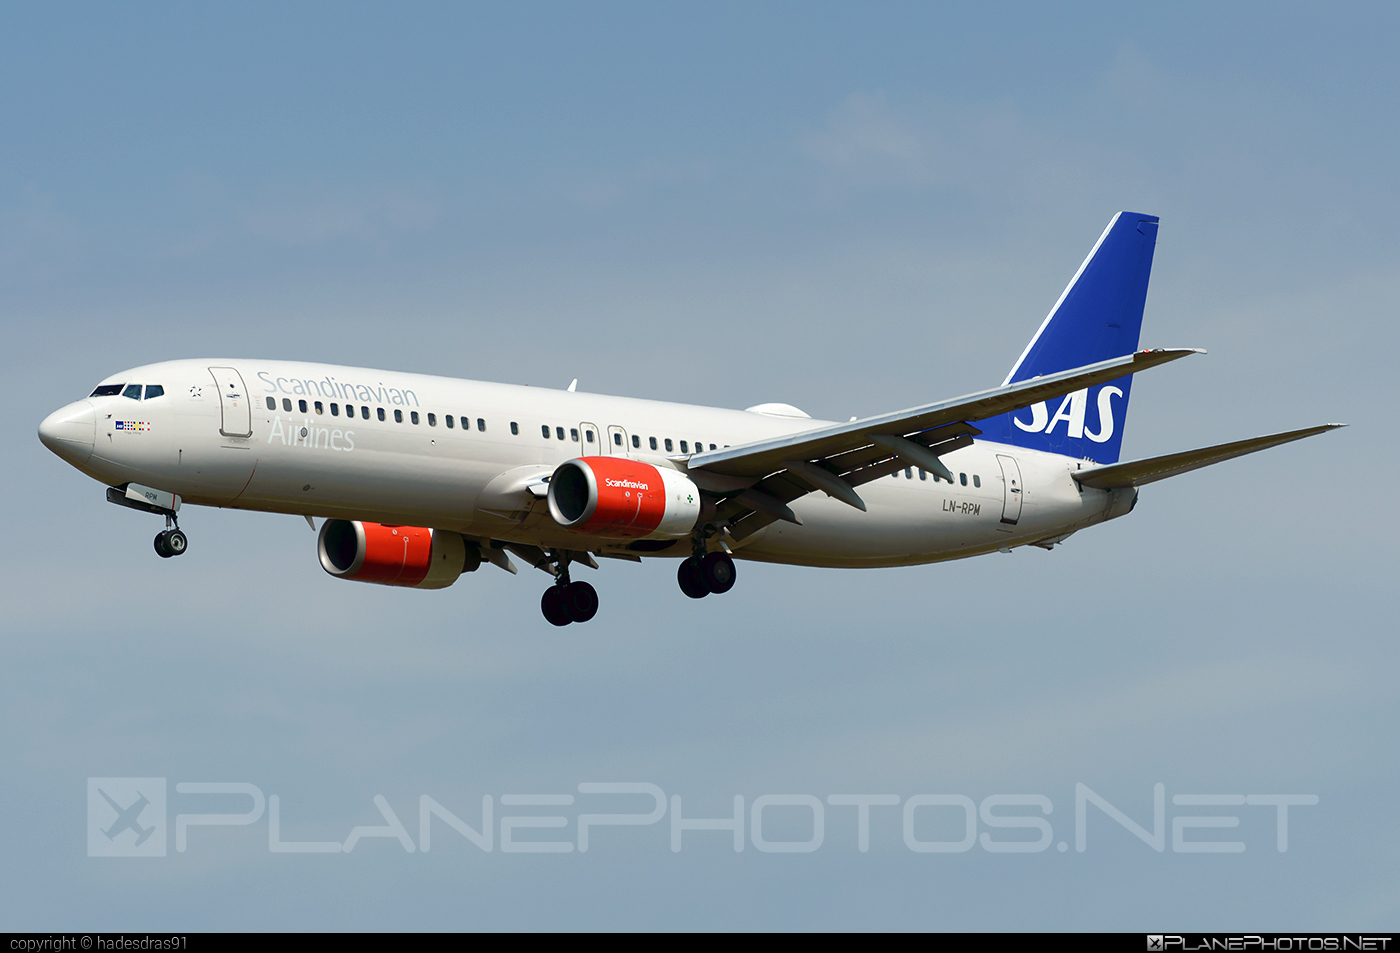 Boeing 737-800 - LN-RPM operated by Scandinavian Airlines (SAS) #b737 #b737nextgen #b737ng #boeing #boeing737 #sas #sasairlines #scandinavianairlines